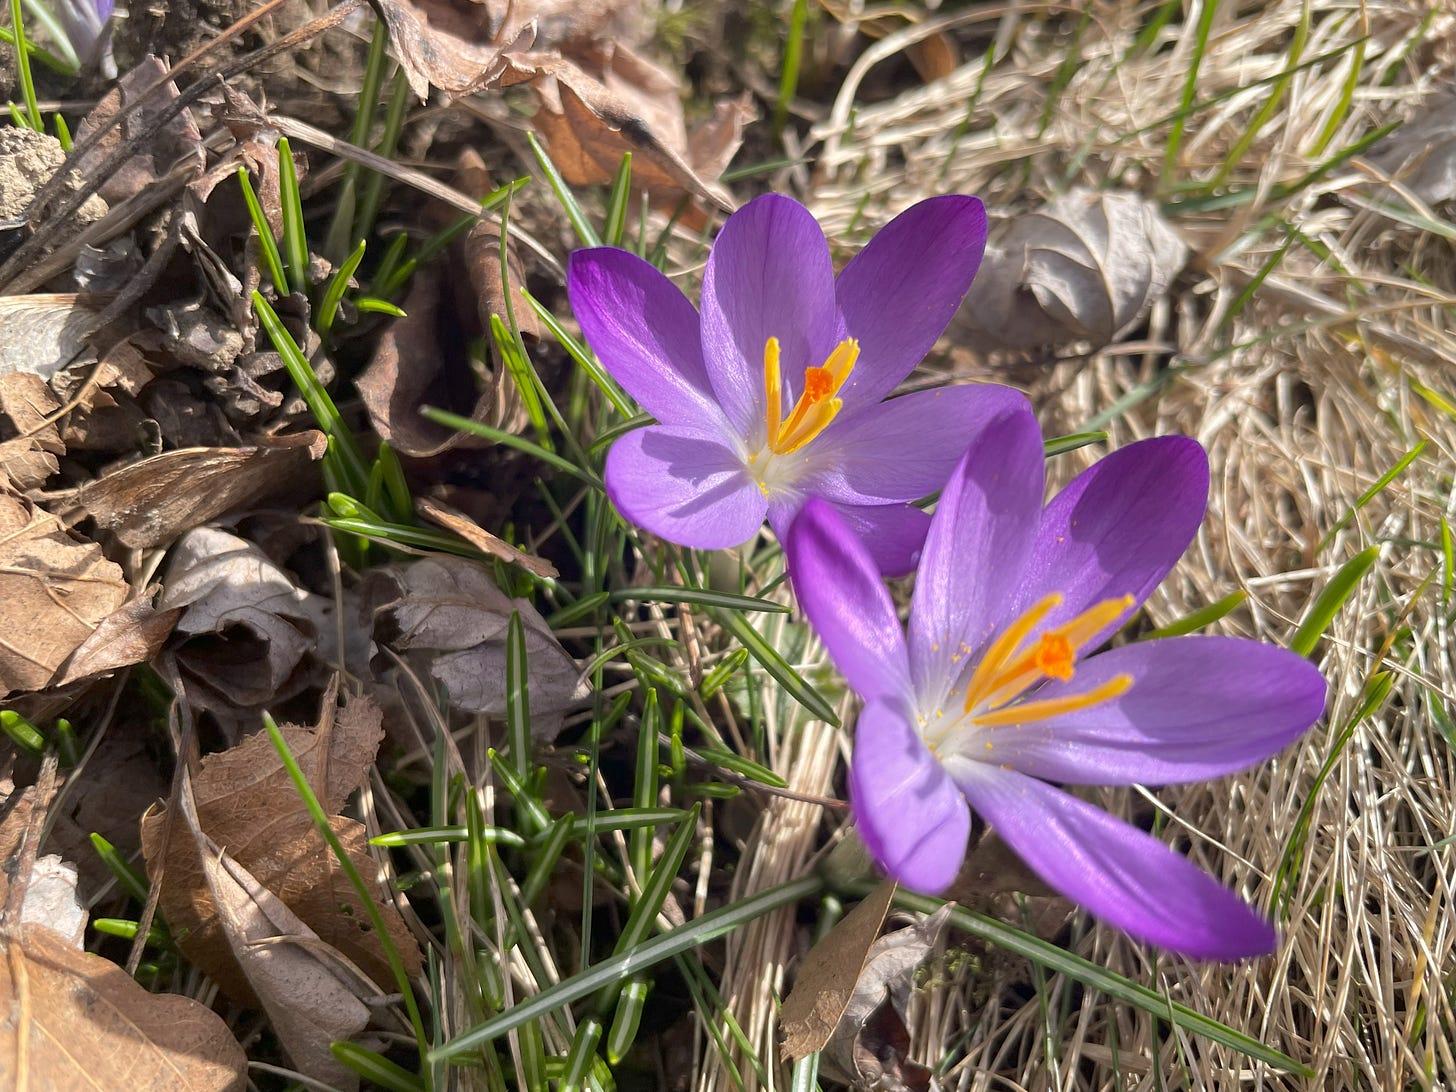 Purple crocus surrounded by dry brown leaves